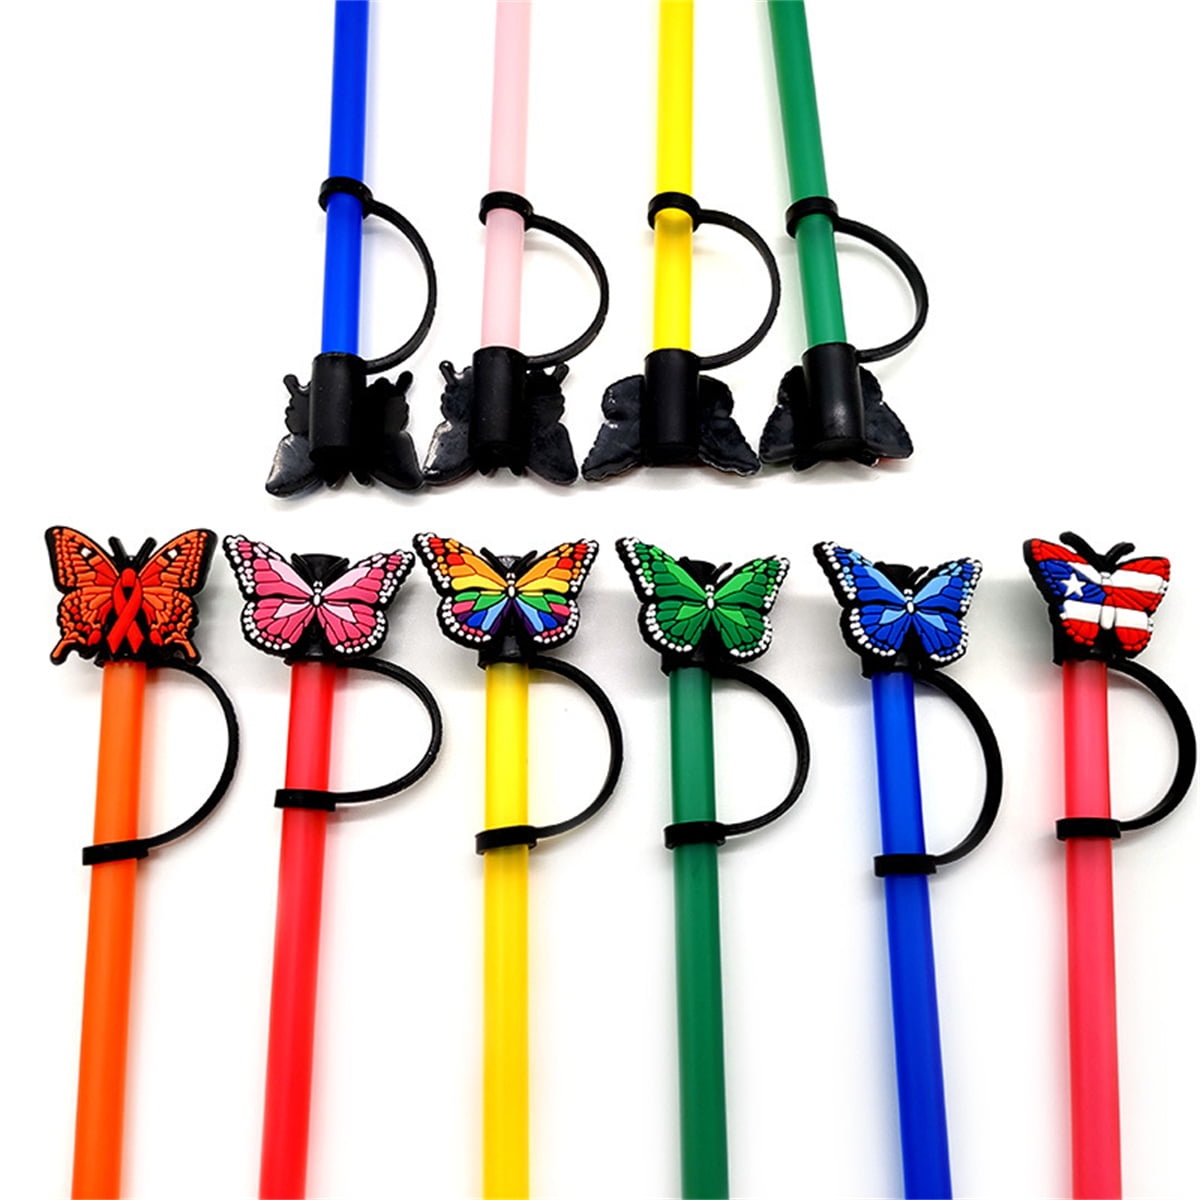 9pcs 8mm Safe Butterfiles Straw Stopper Easy To Clean Silicone Straw Cover  Reusable Food Grade Butterflies Straw Covers for Home - AliExpress